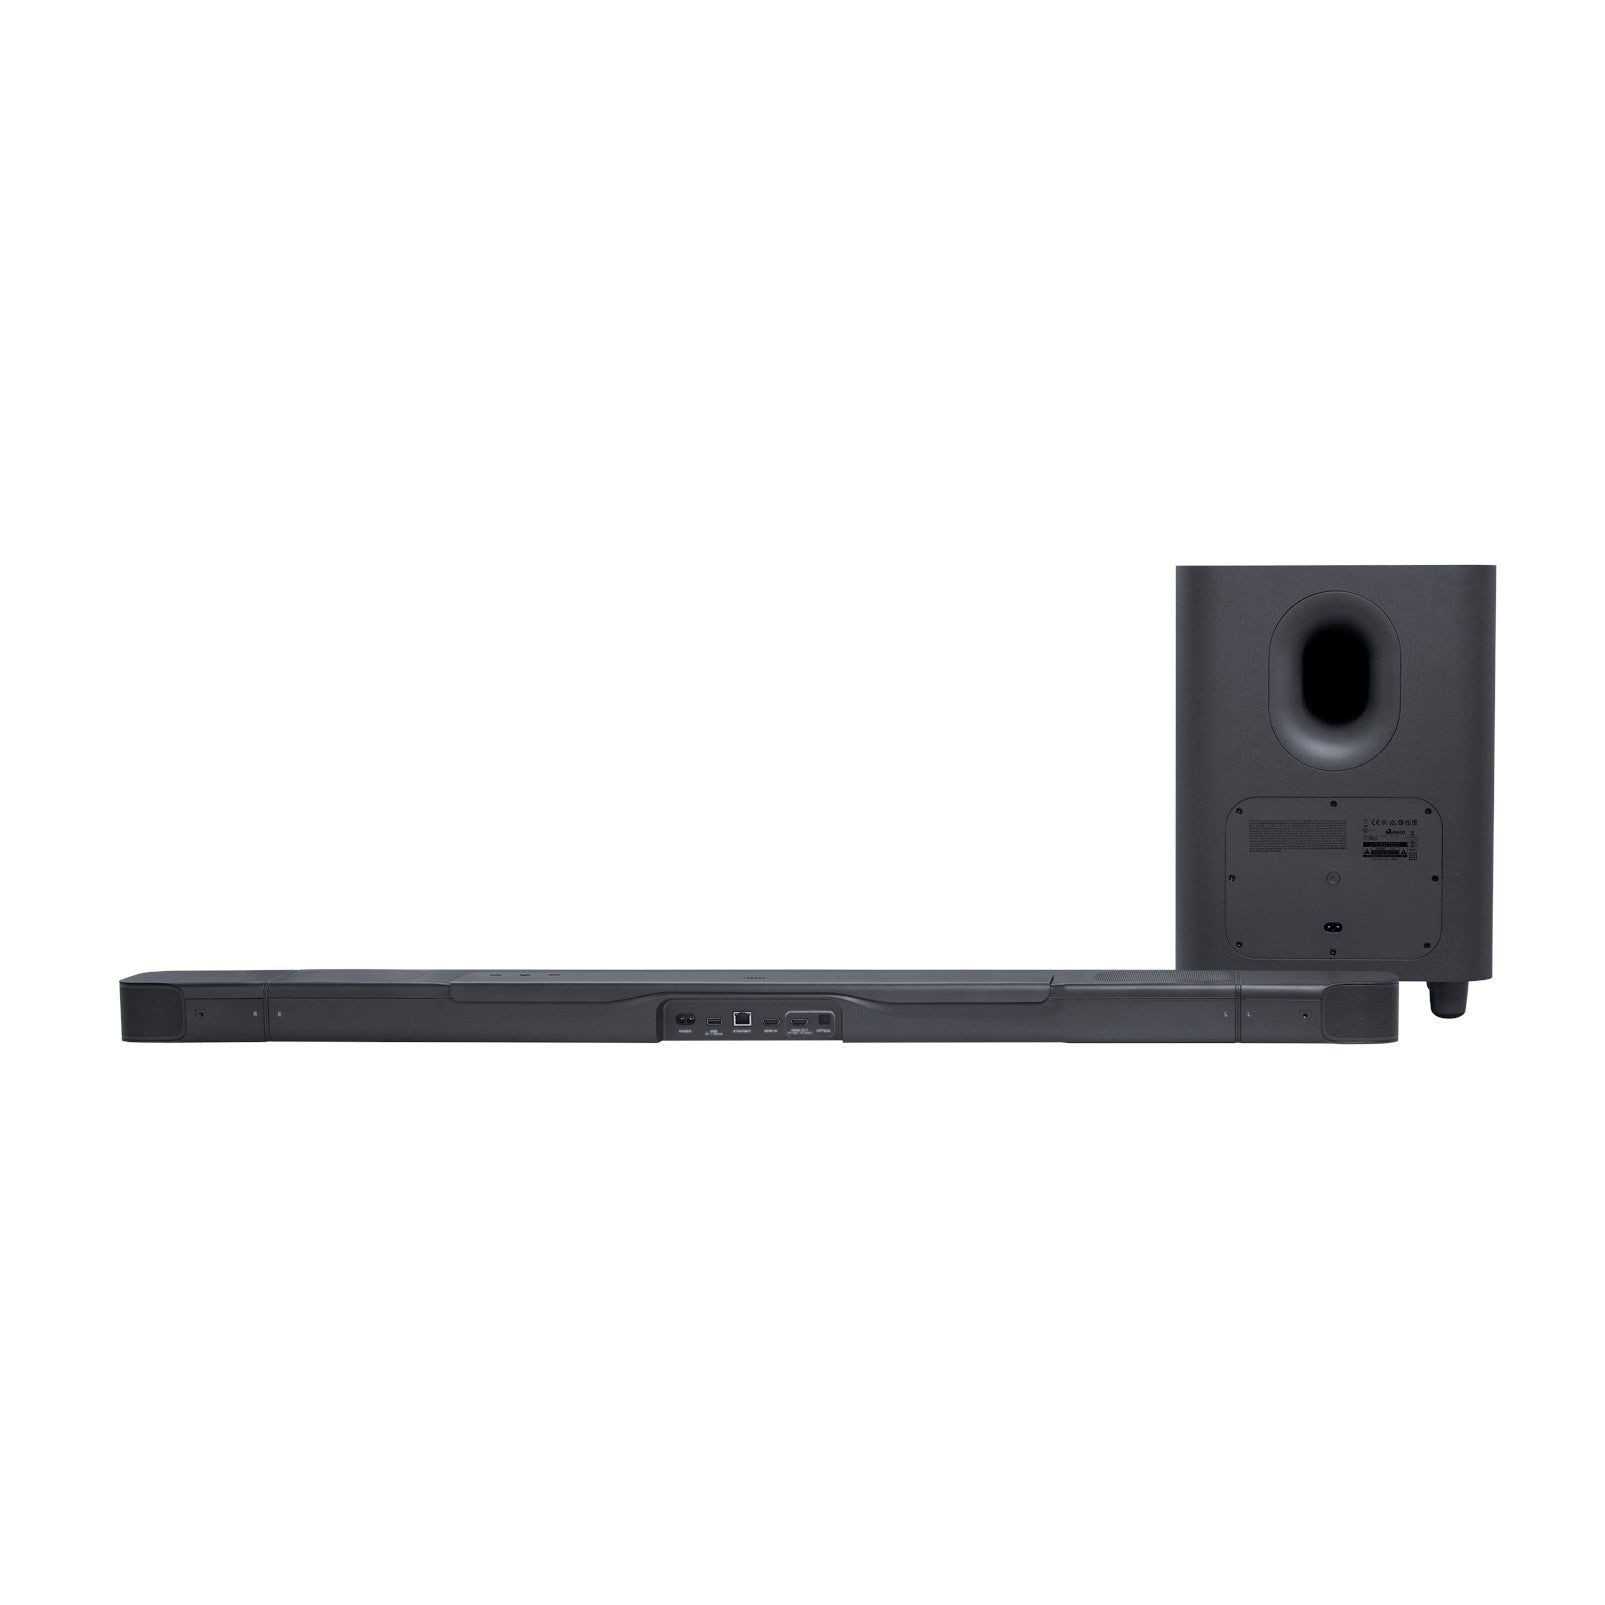 JBL Bar 800 5.1.2-channel soundbar with detachable surround speakers and Dolby Atmos®